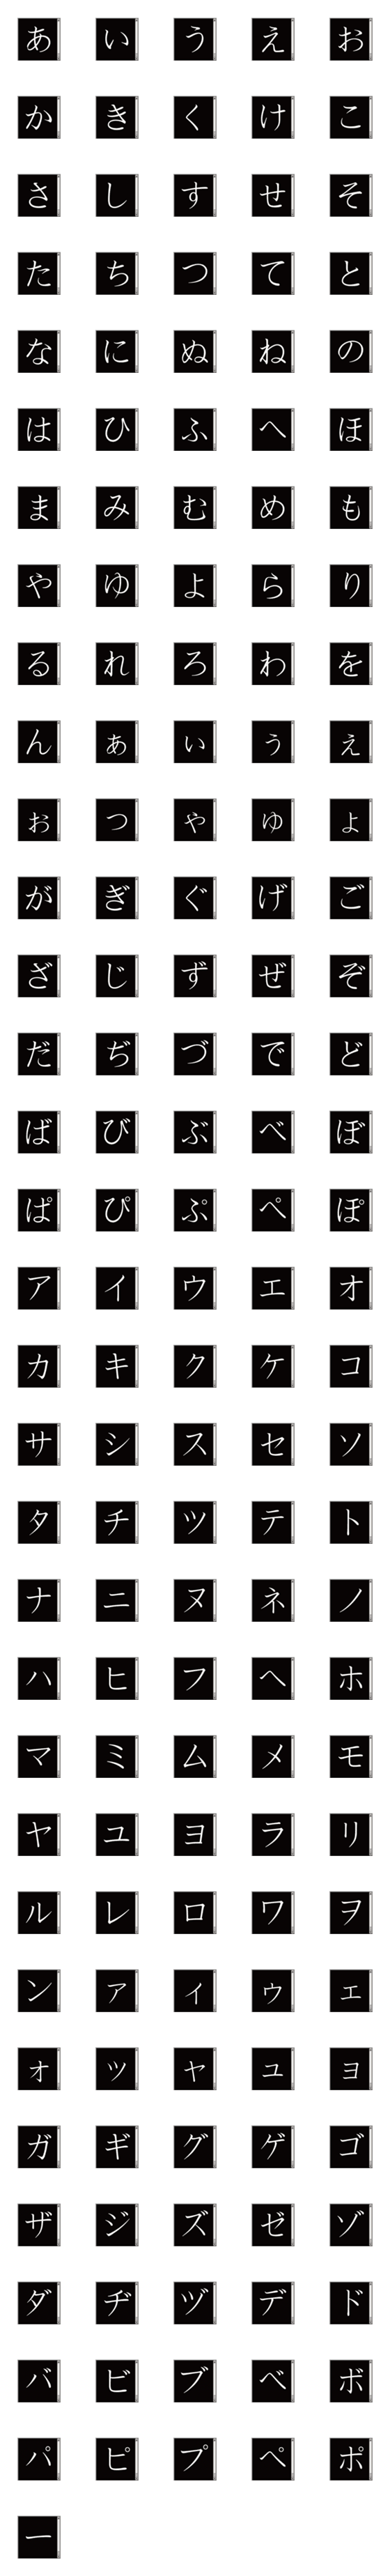 [LINE絵文字]チャットルームの画像一覧